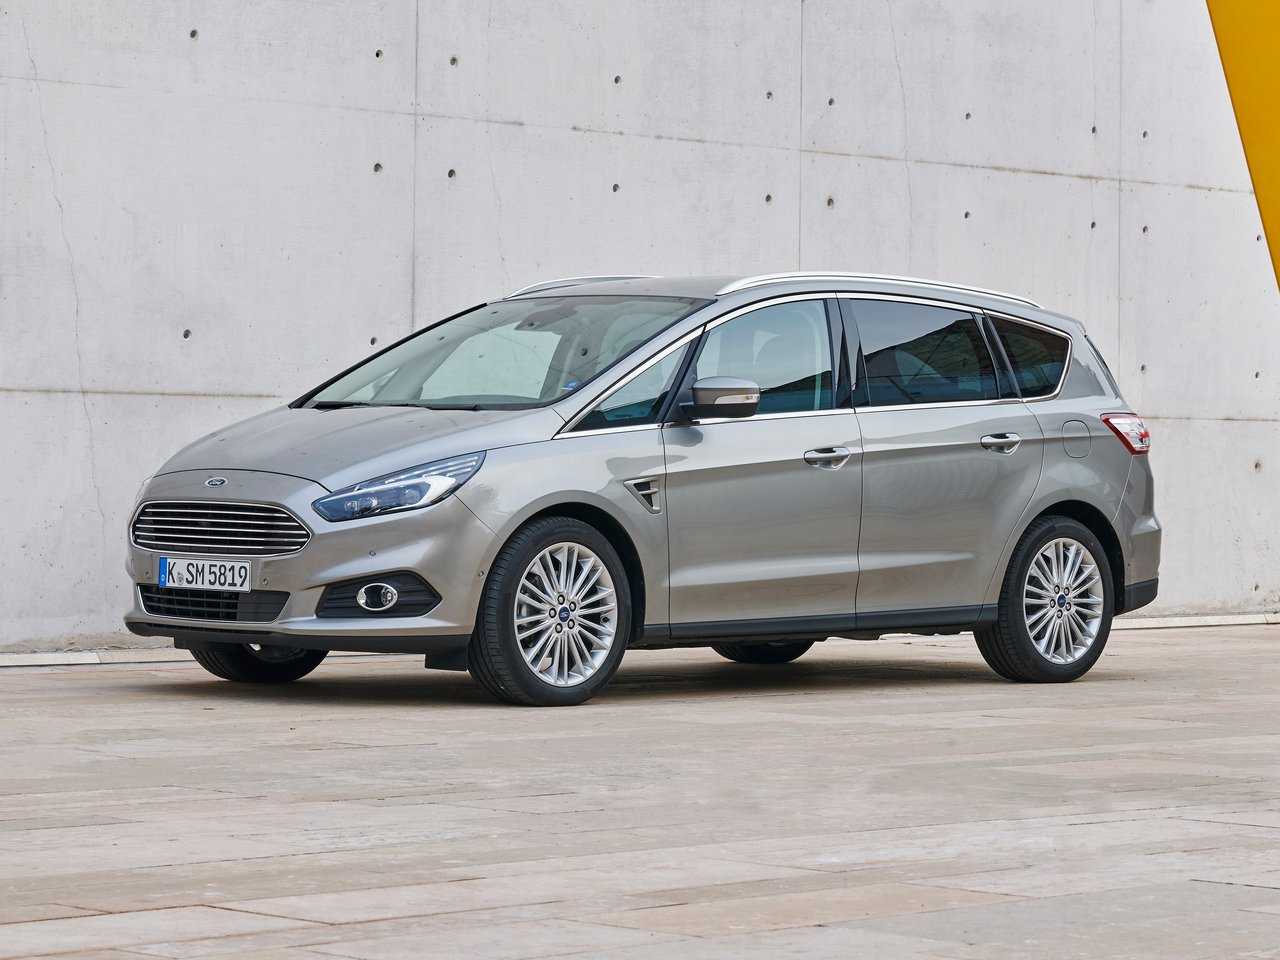 Ford galaxy / s-max (2006-2015) – двое из ларца, одинаковых с лица